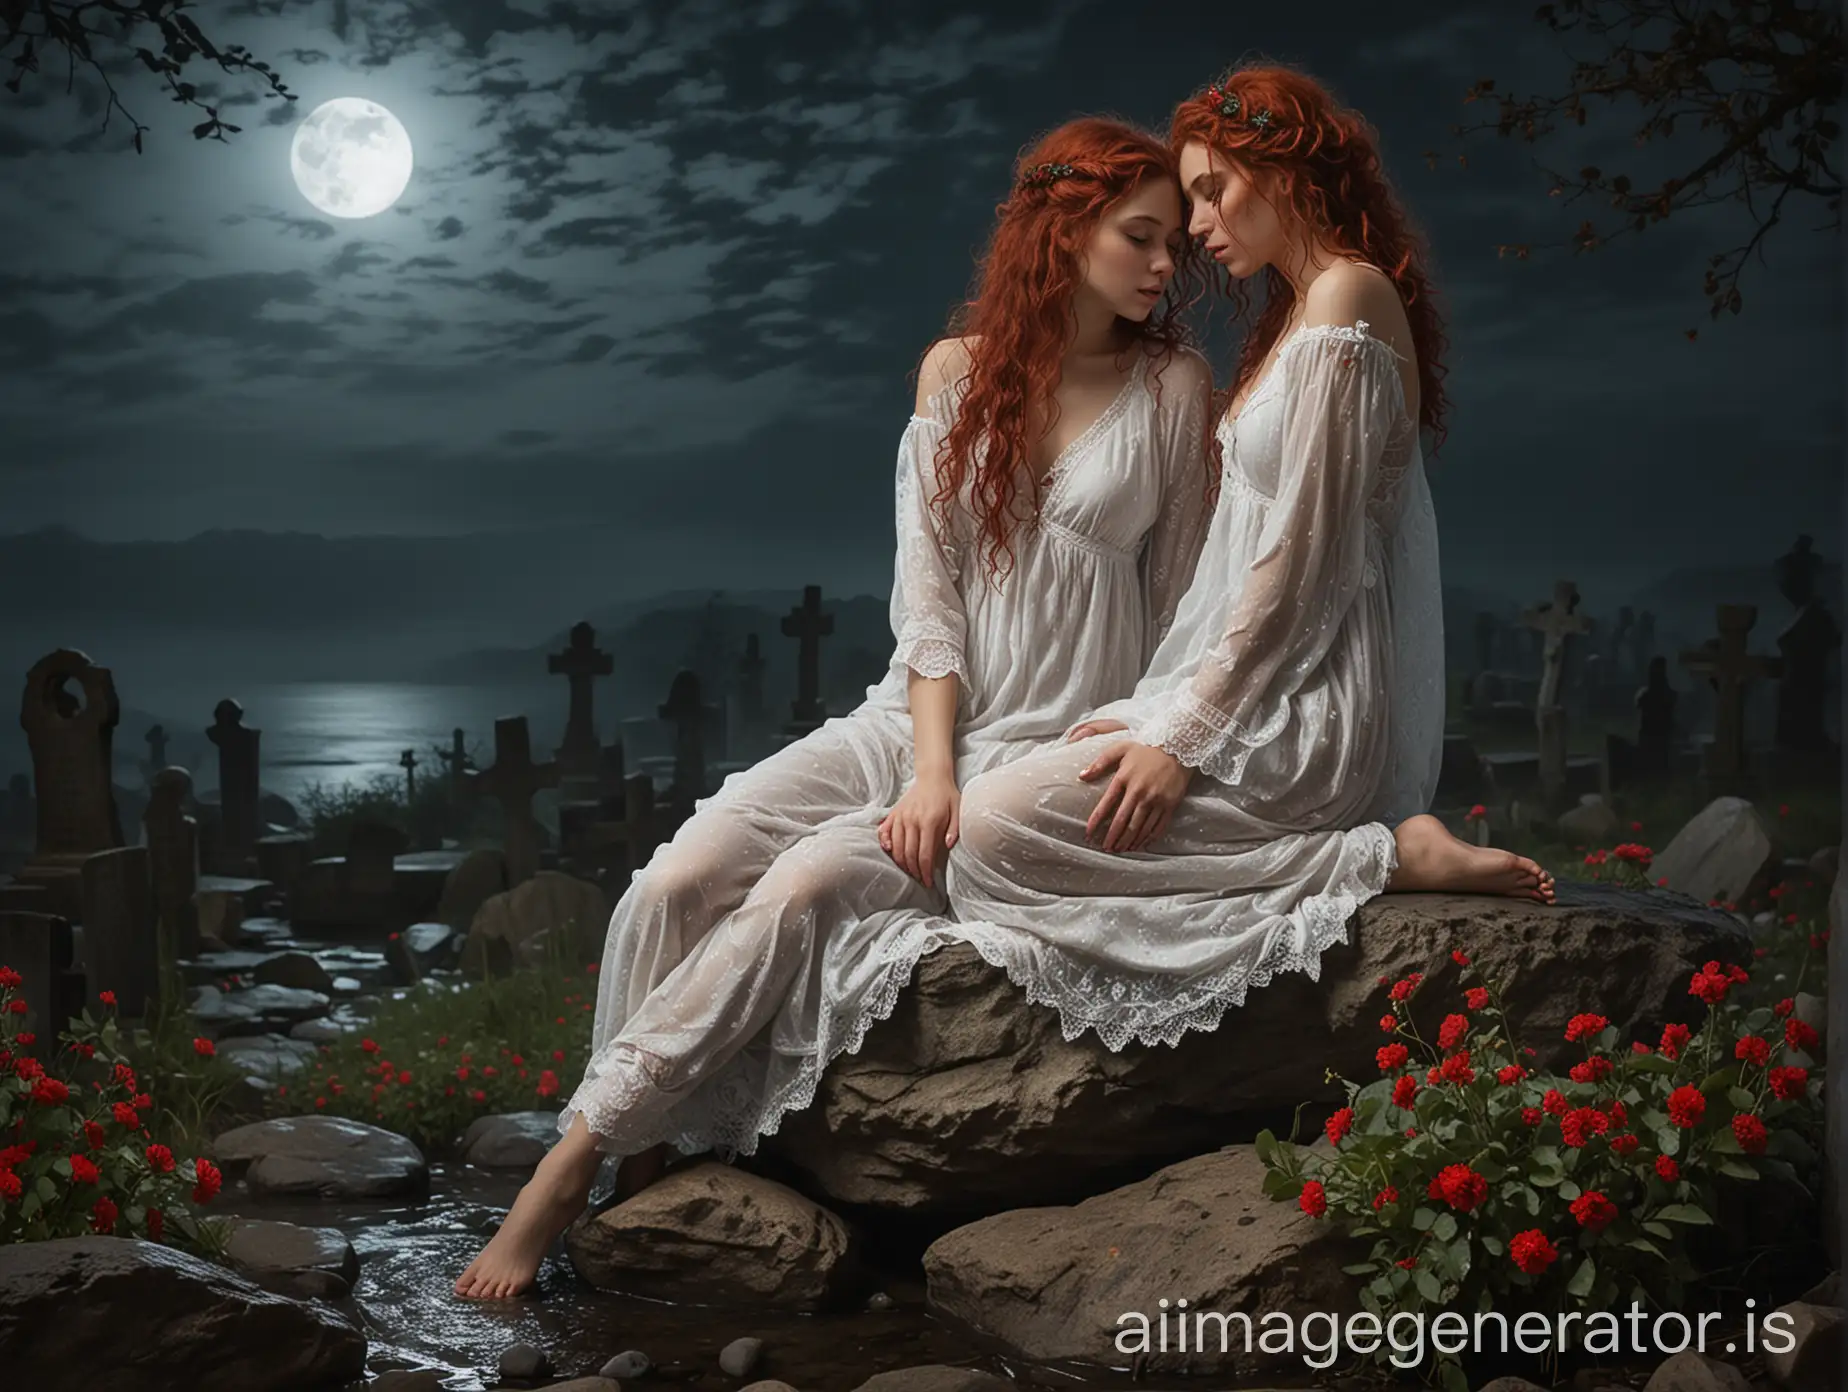 cris ortega inspired art style,  femjoy, two women hugging sitting on a wet rock, lantern on a rock, white lace intricate long raggedy translucent nightgown, very rainy weather, wet oily body , woman with a braided white hair, woman with a red curly hair, woman arms in tattooes, backlight, red delicate flowers at woman's feet, dark night sky, midnight at a graveyard, fullmoon, foggy background